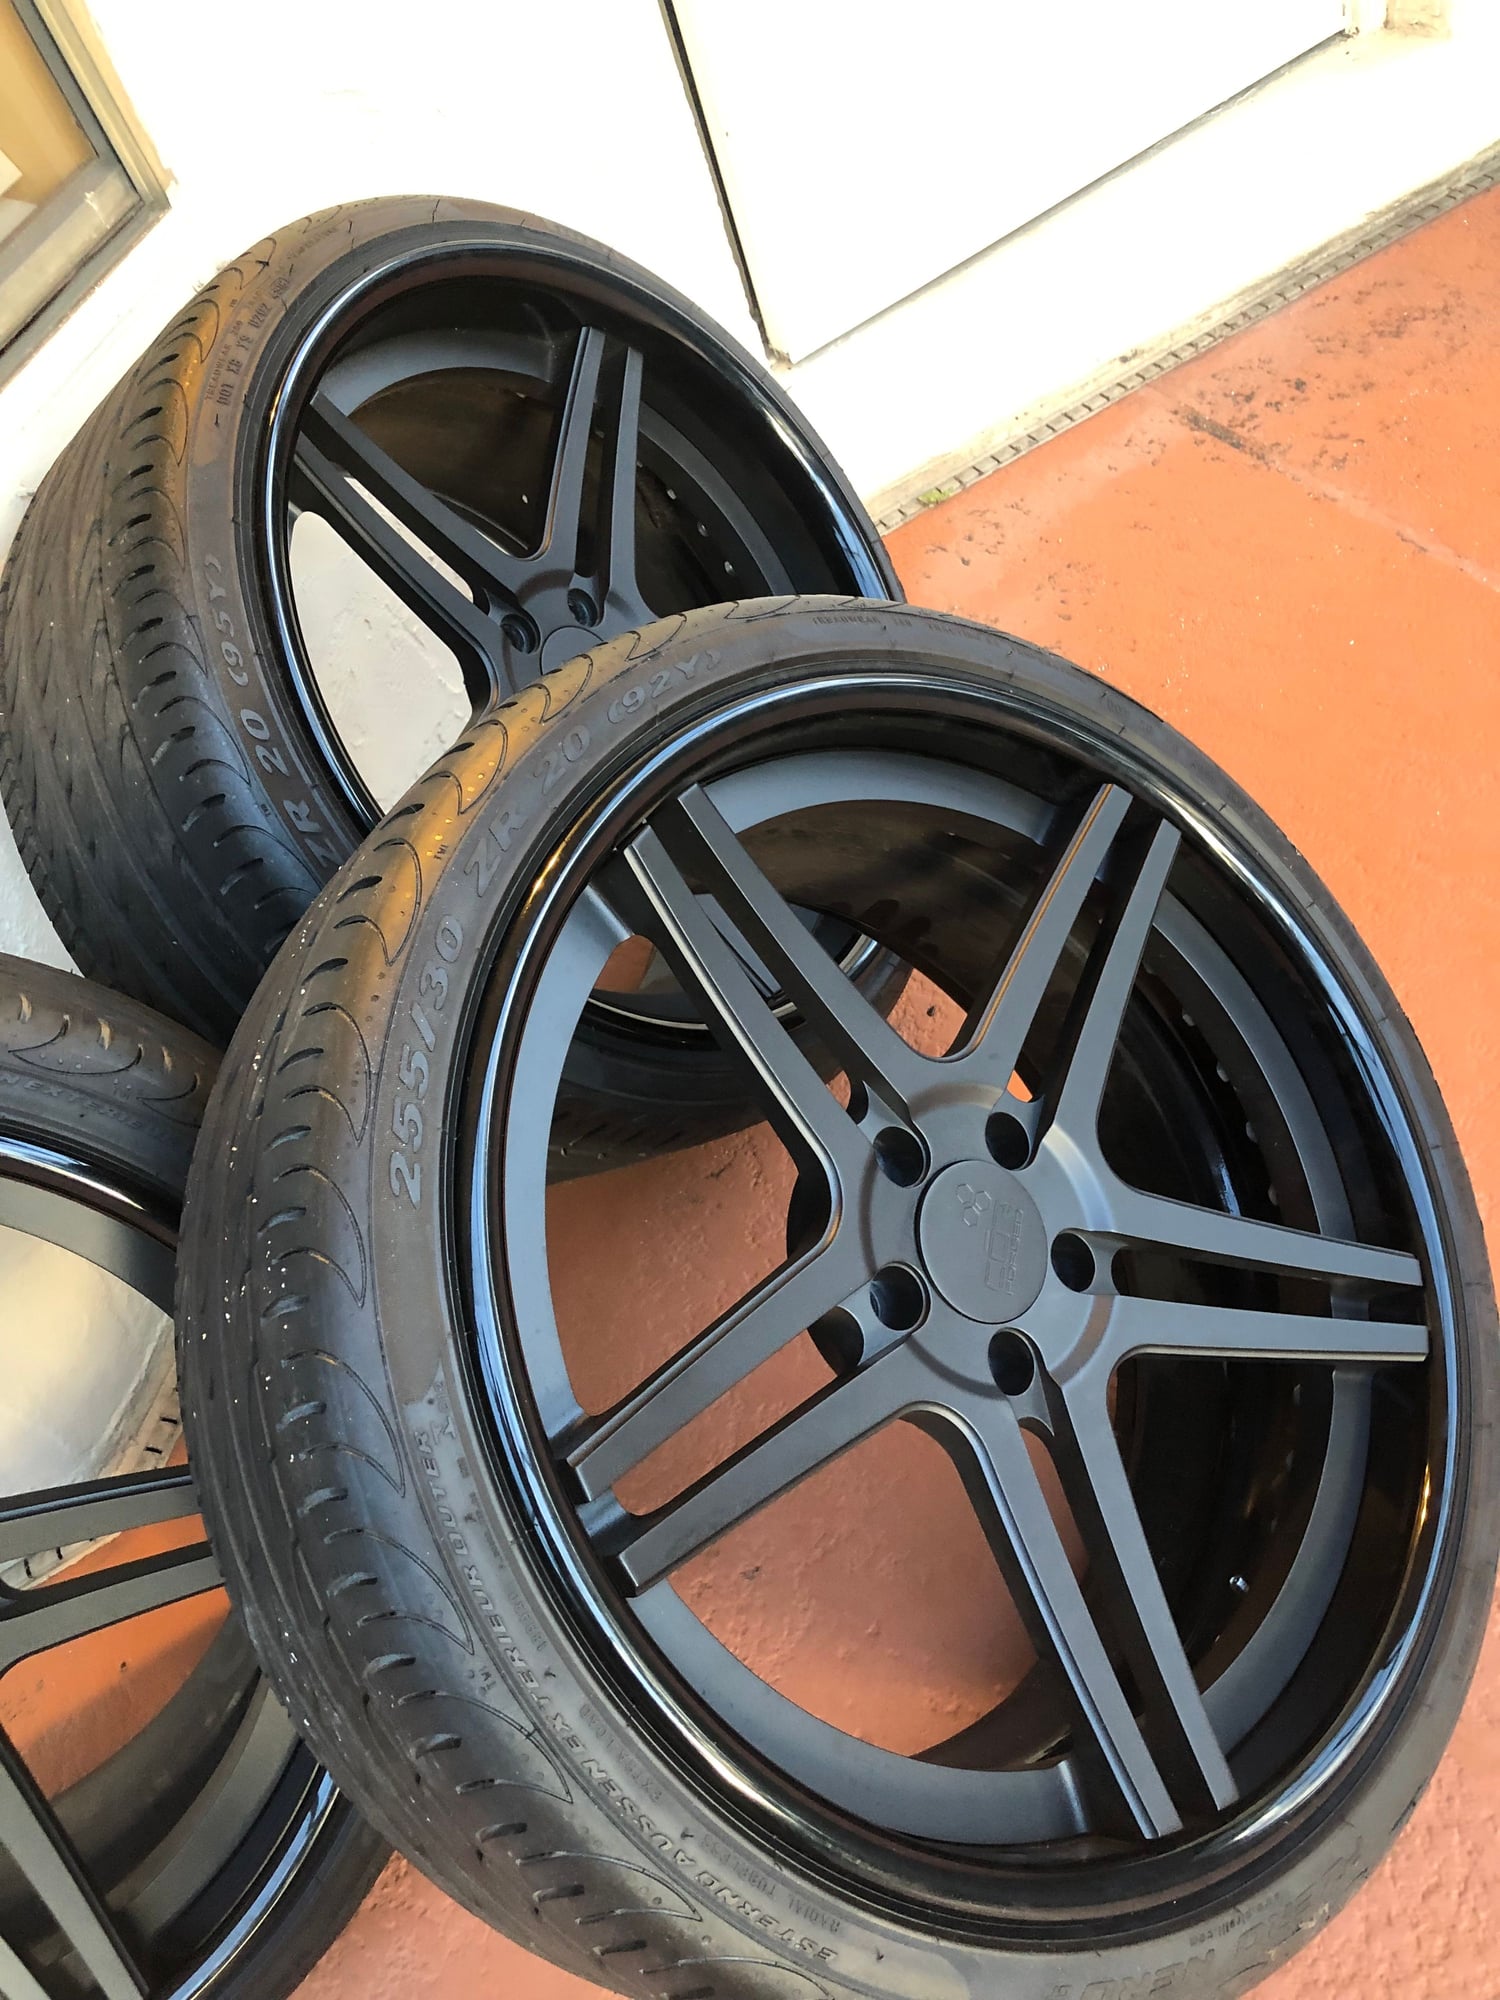 Wheels and Tires/Axles - Cor Custom build 3 piece concave forged  wheels - New - 2010 to 2013 Mercedes-Benz E63 AMG - Delray Beach, FL 33484, United States